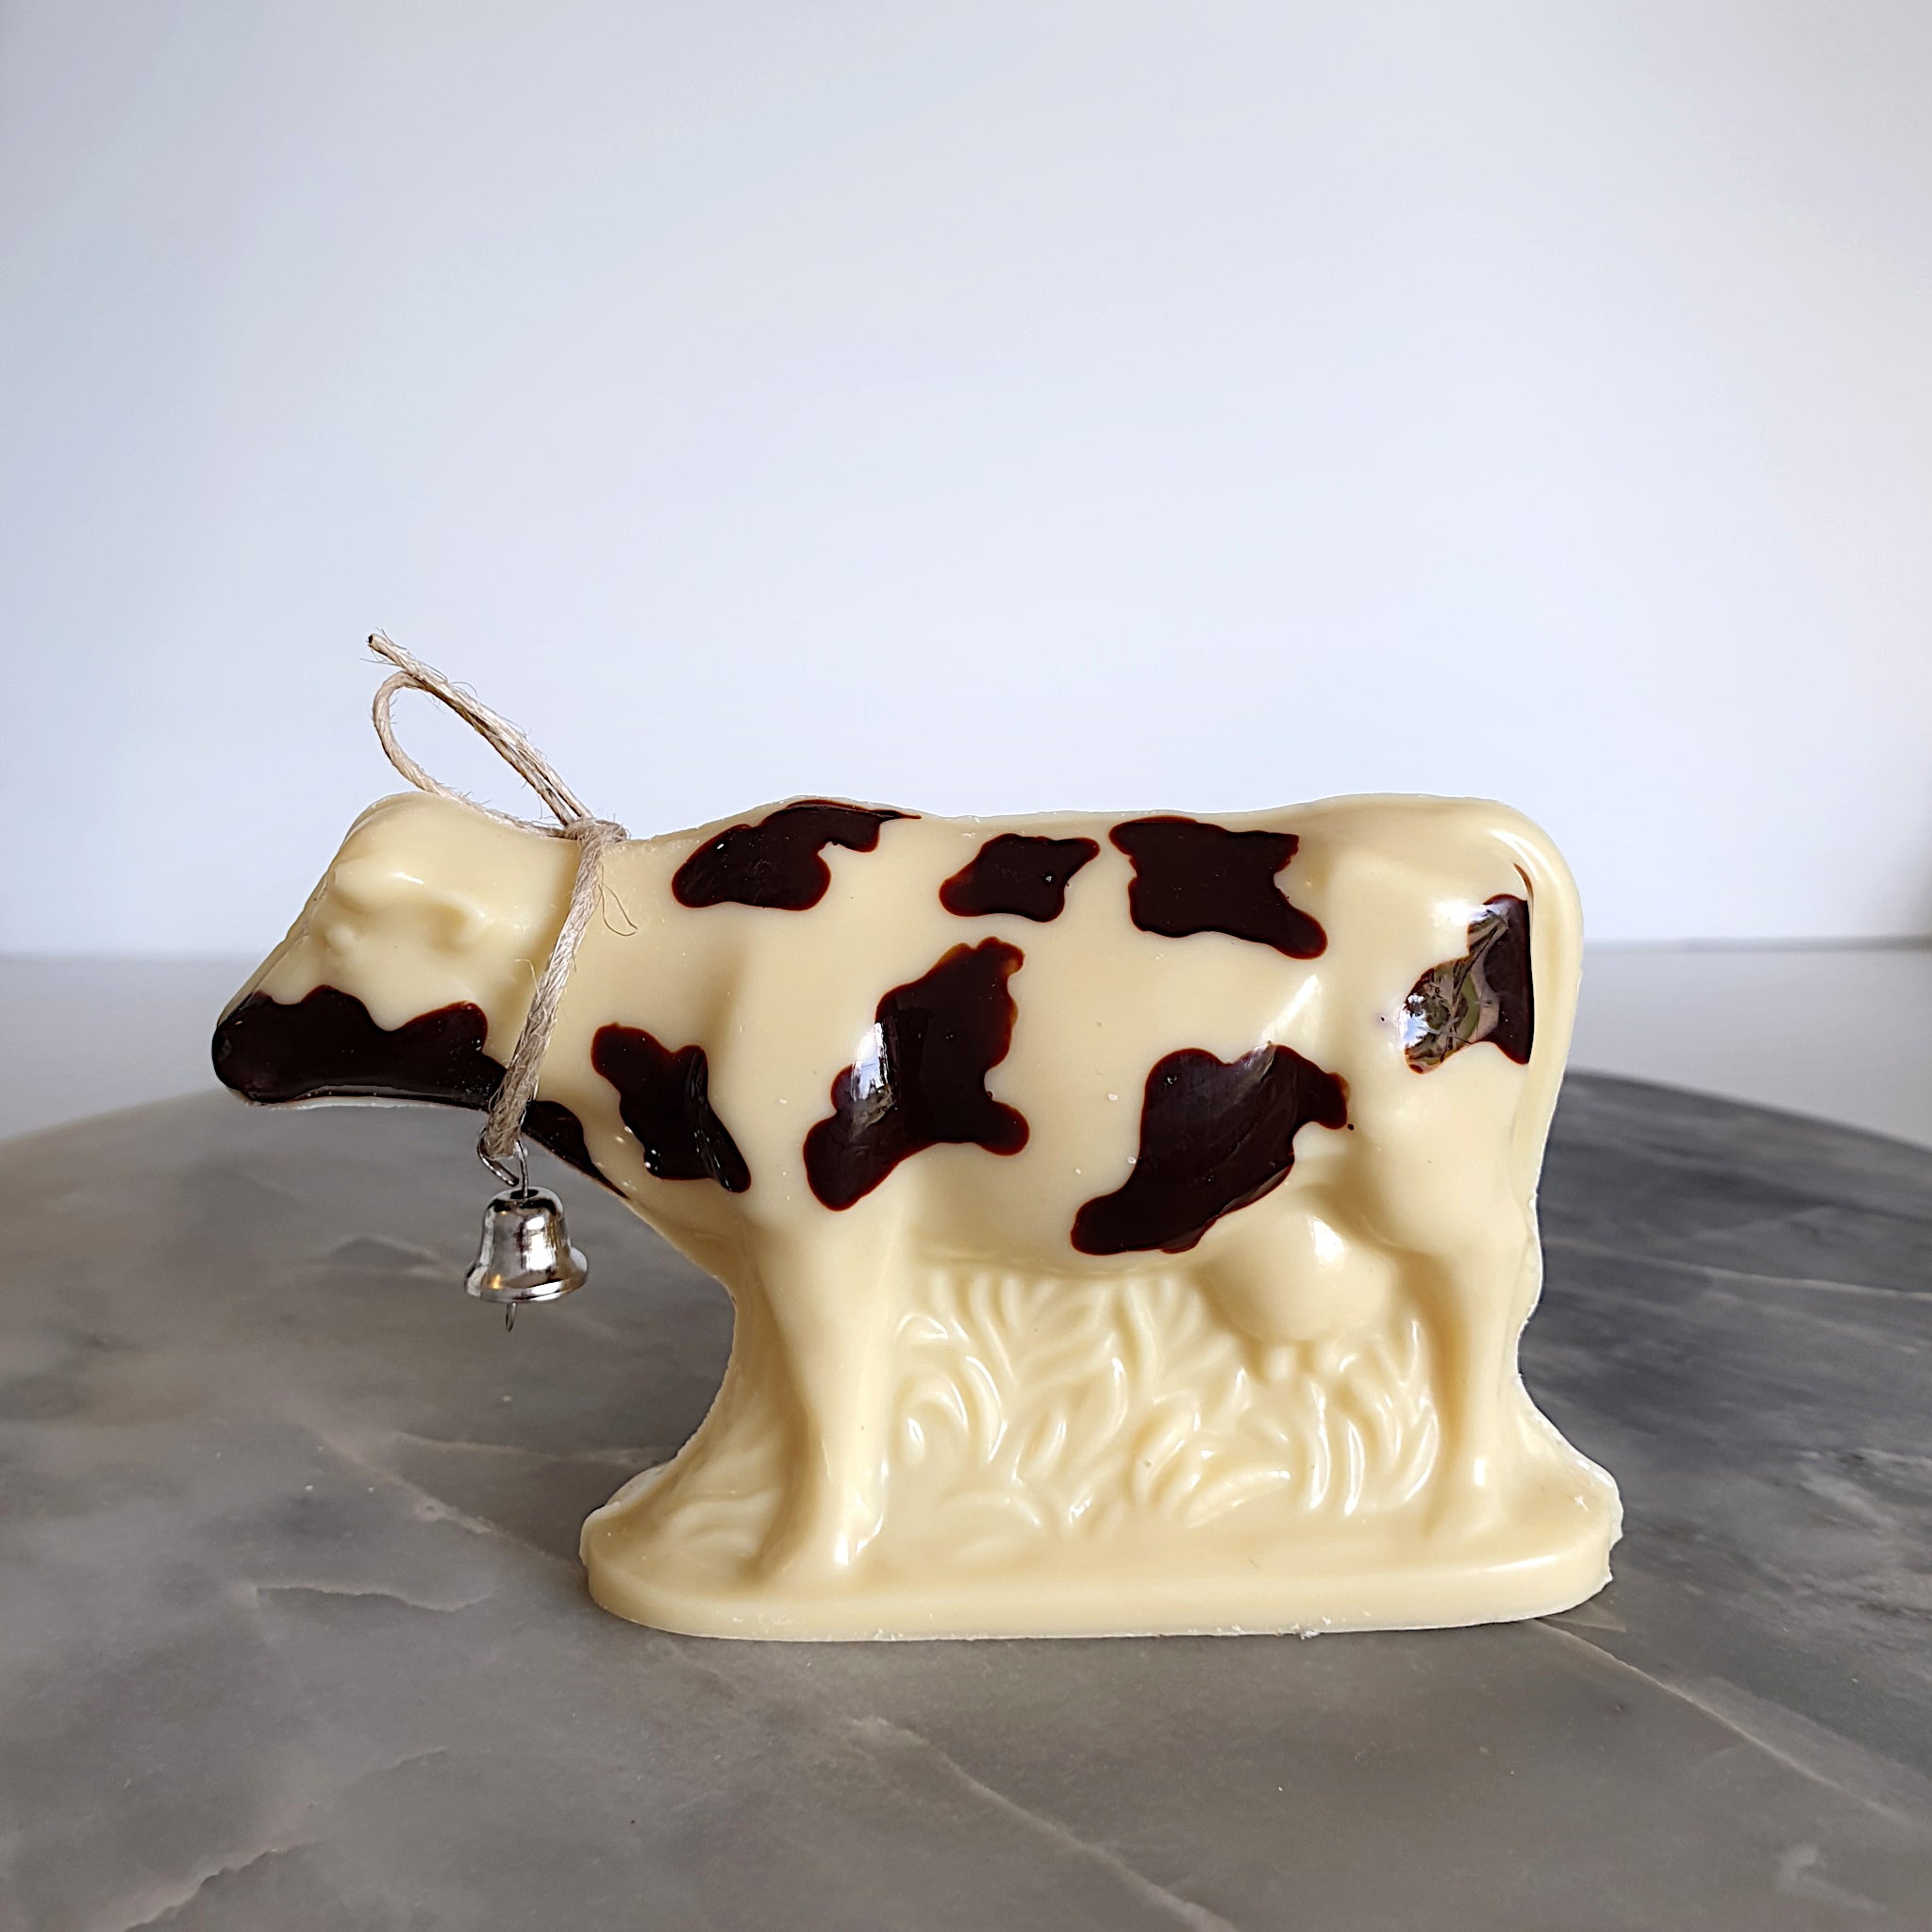 White chocolate Friesian breed cow made using Callebaut Belgian couverture chocolate. Handmade in Milton NSW by Woodstock Chocolate Co.